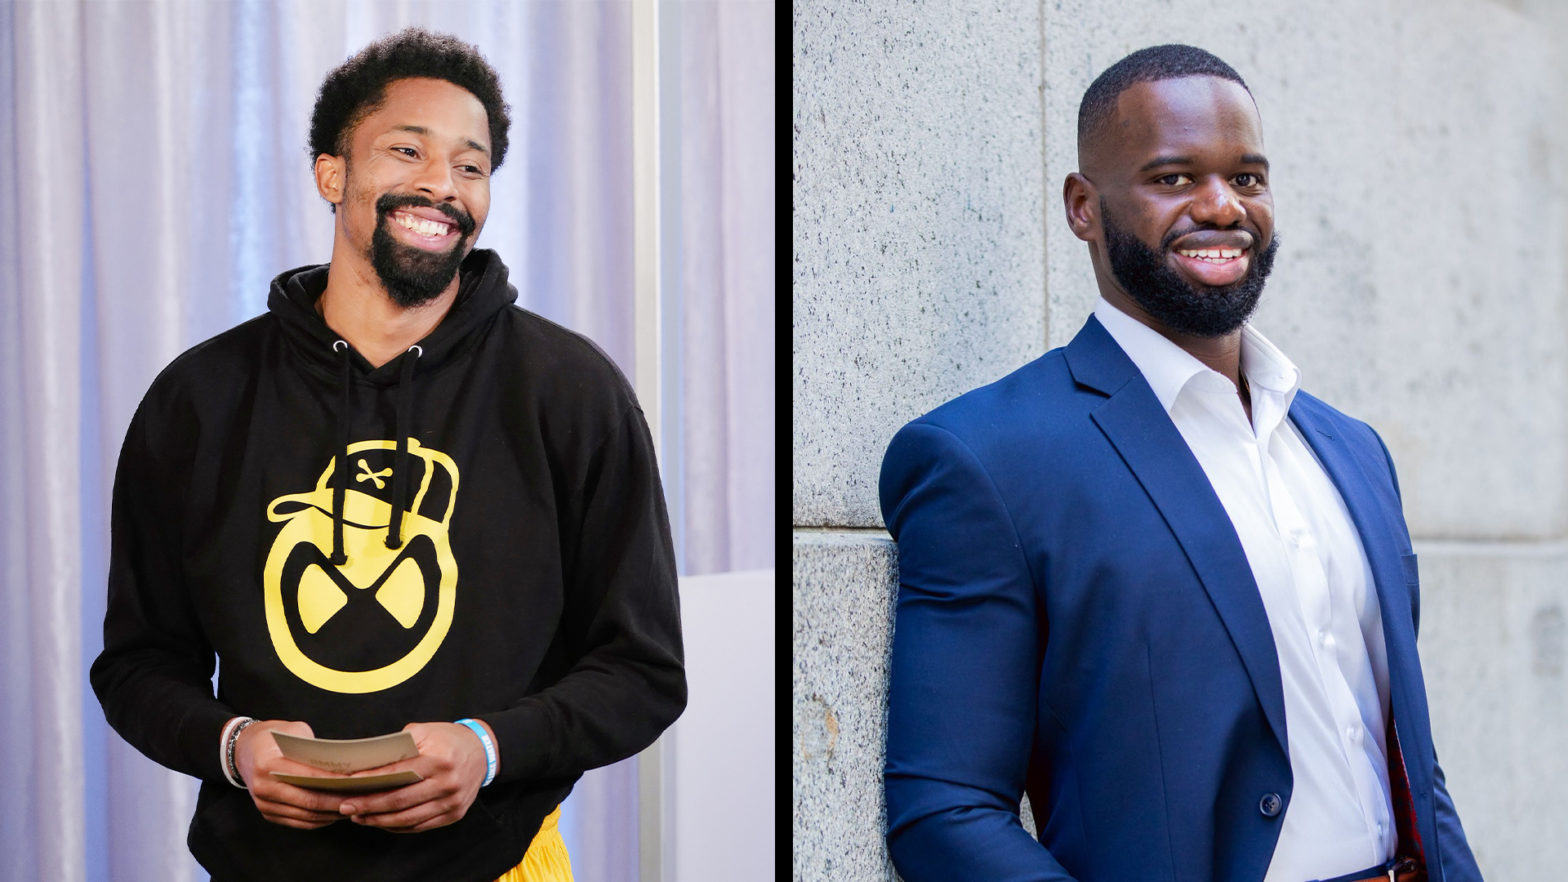 NBA's Spencer Dinwiddie, Ex-Wall Streeter Solo Ceesay Launch New Podcast With CoinDesk & Spotify